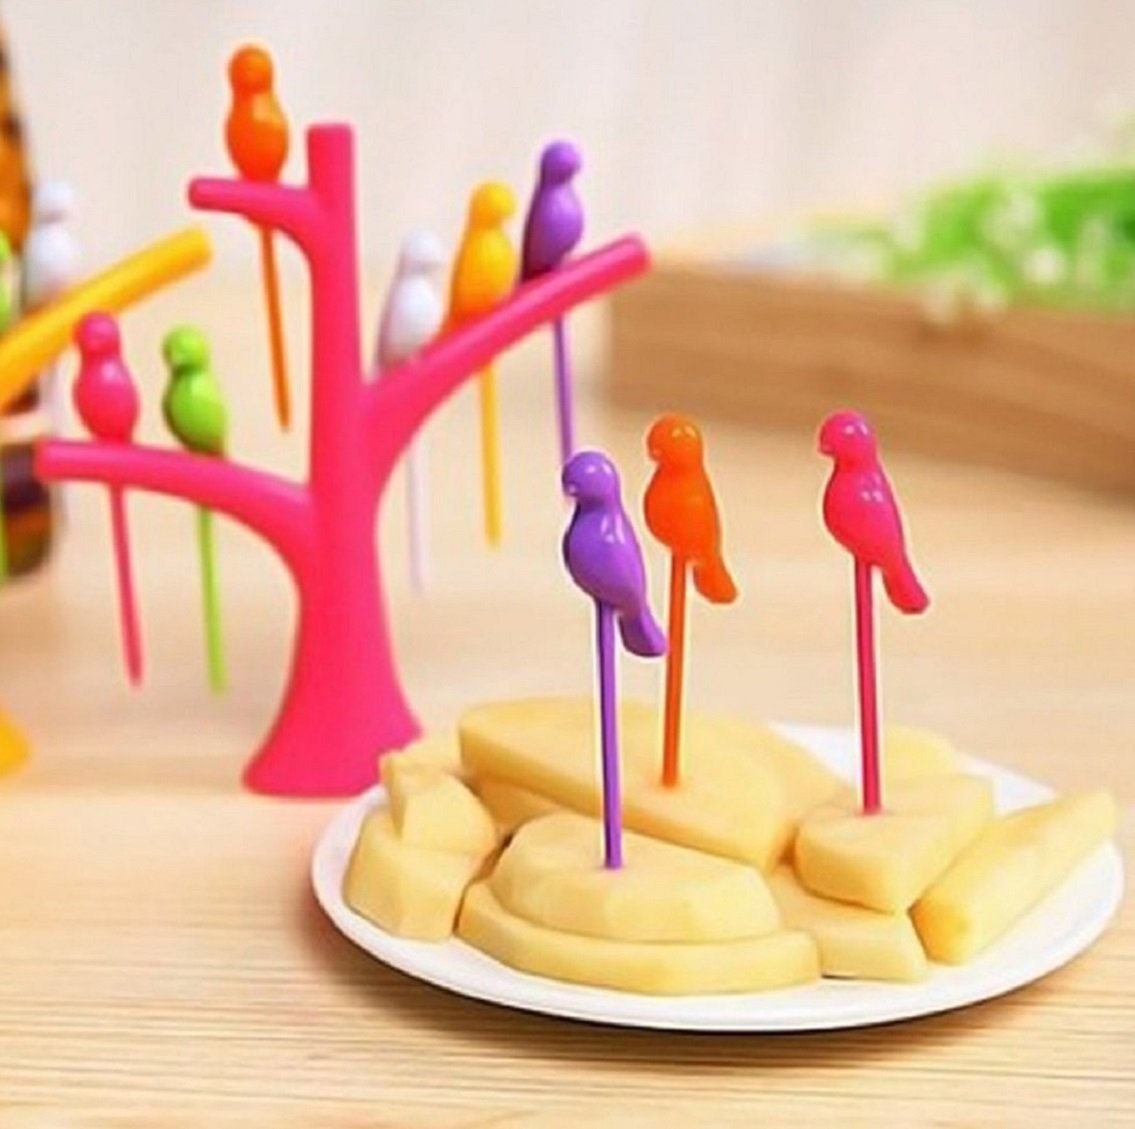 Fruit forks placed inside the tree-shaped stand they come with, while three of them are poked into food.